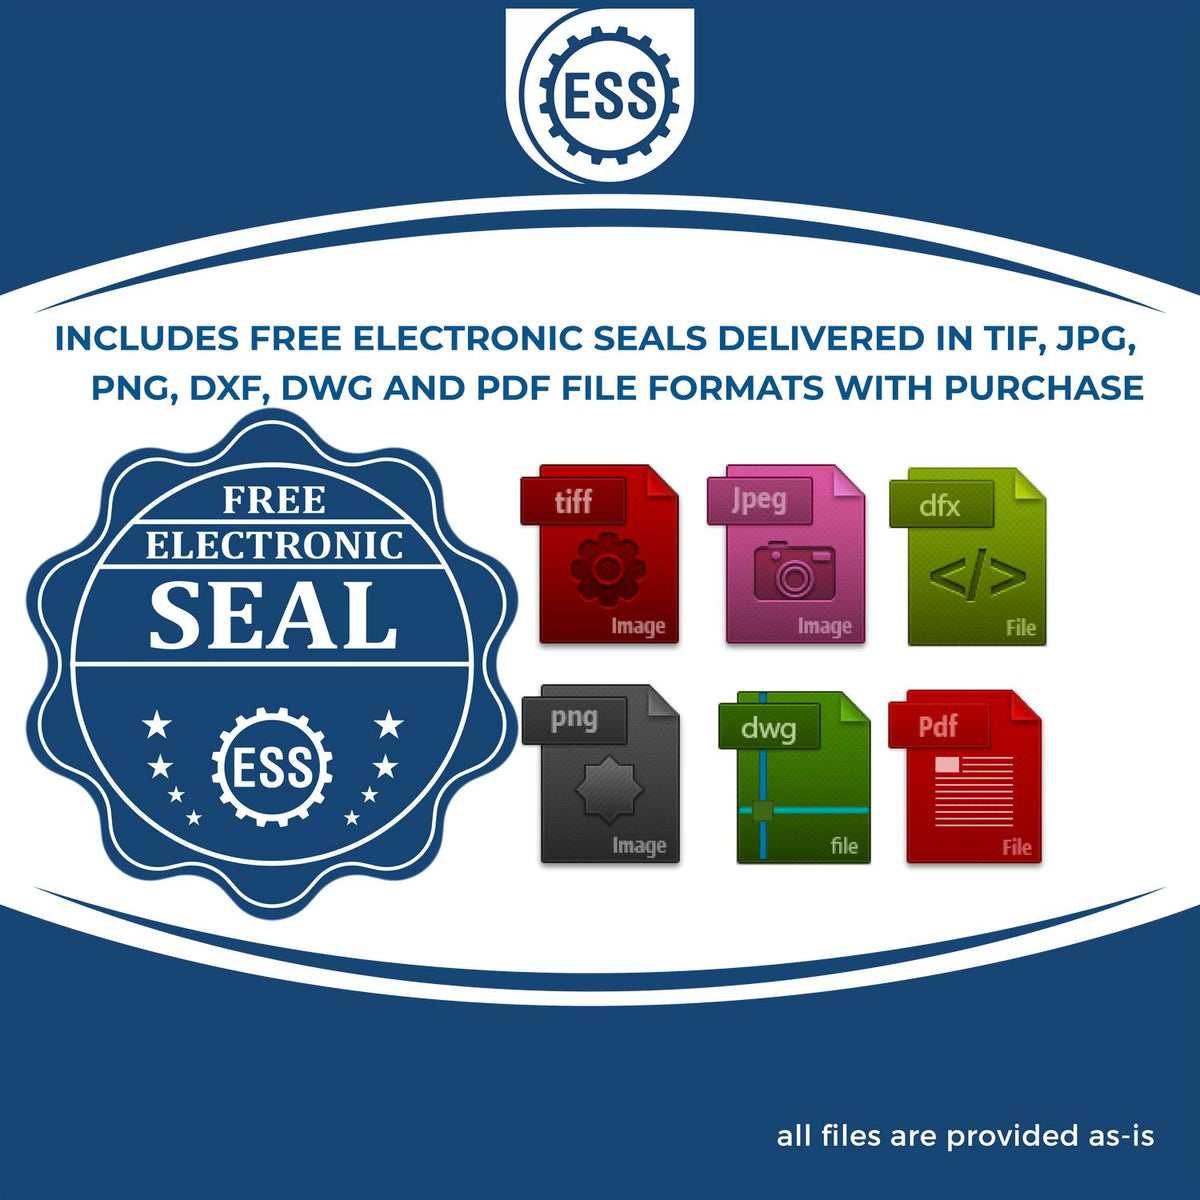 An infographic for the free electronic seal for the Hybrid Maryland Architect Seal illustrating the different file type icons such as DXF, DWG, TIF, JPG and PNG.